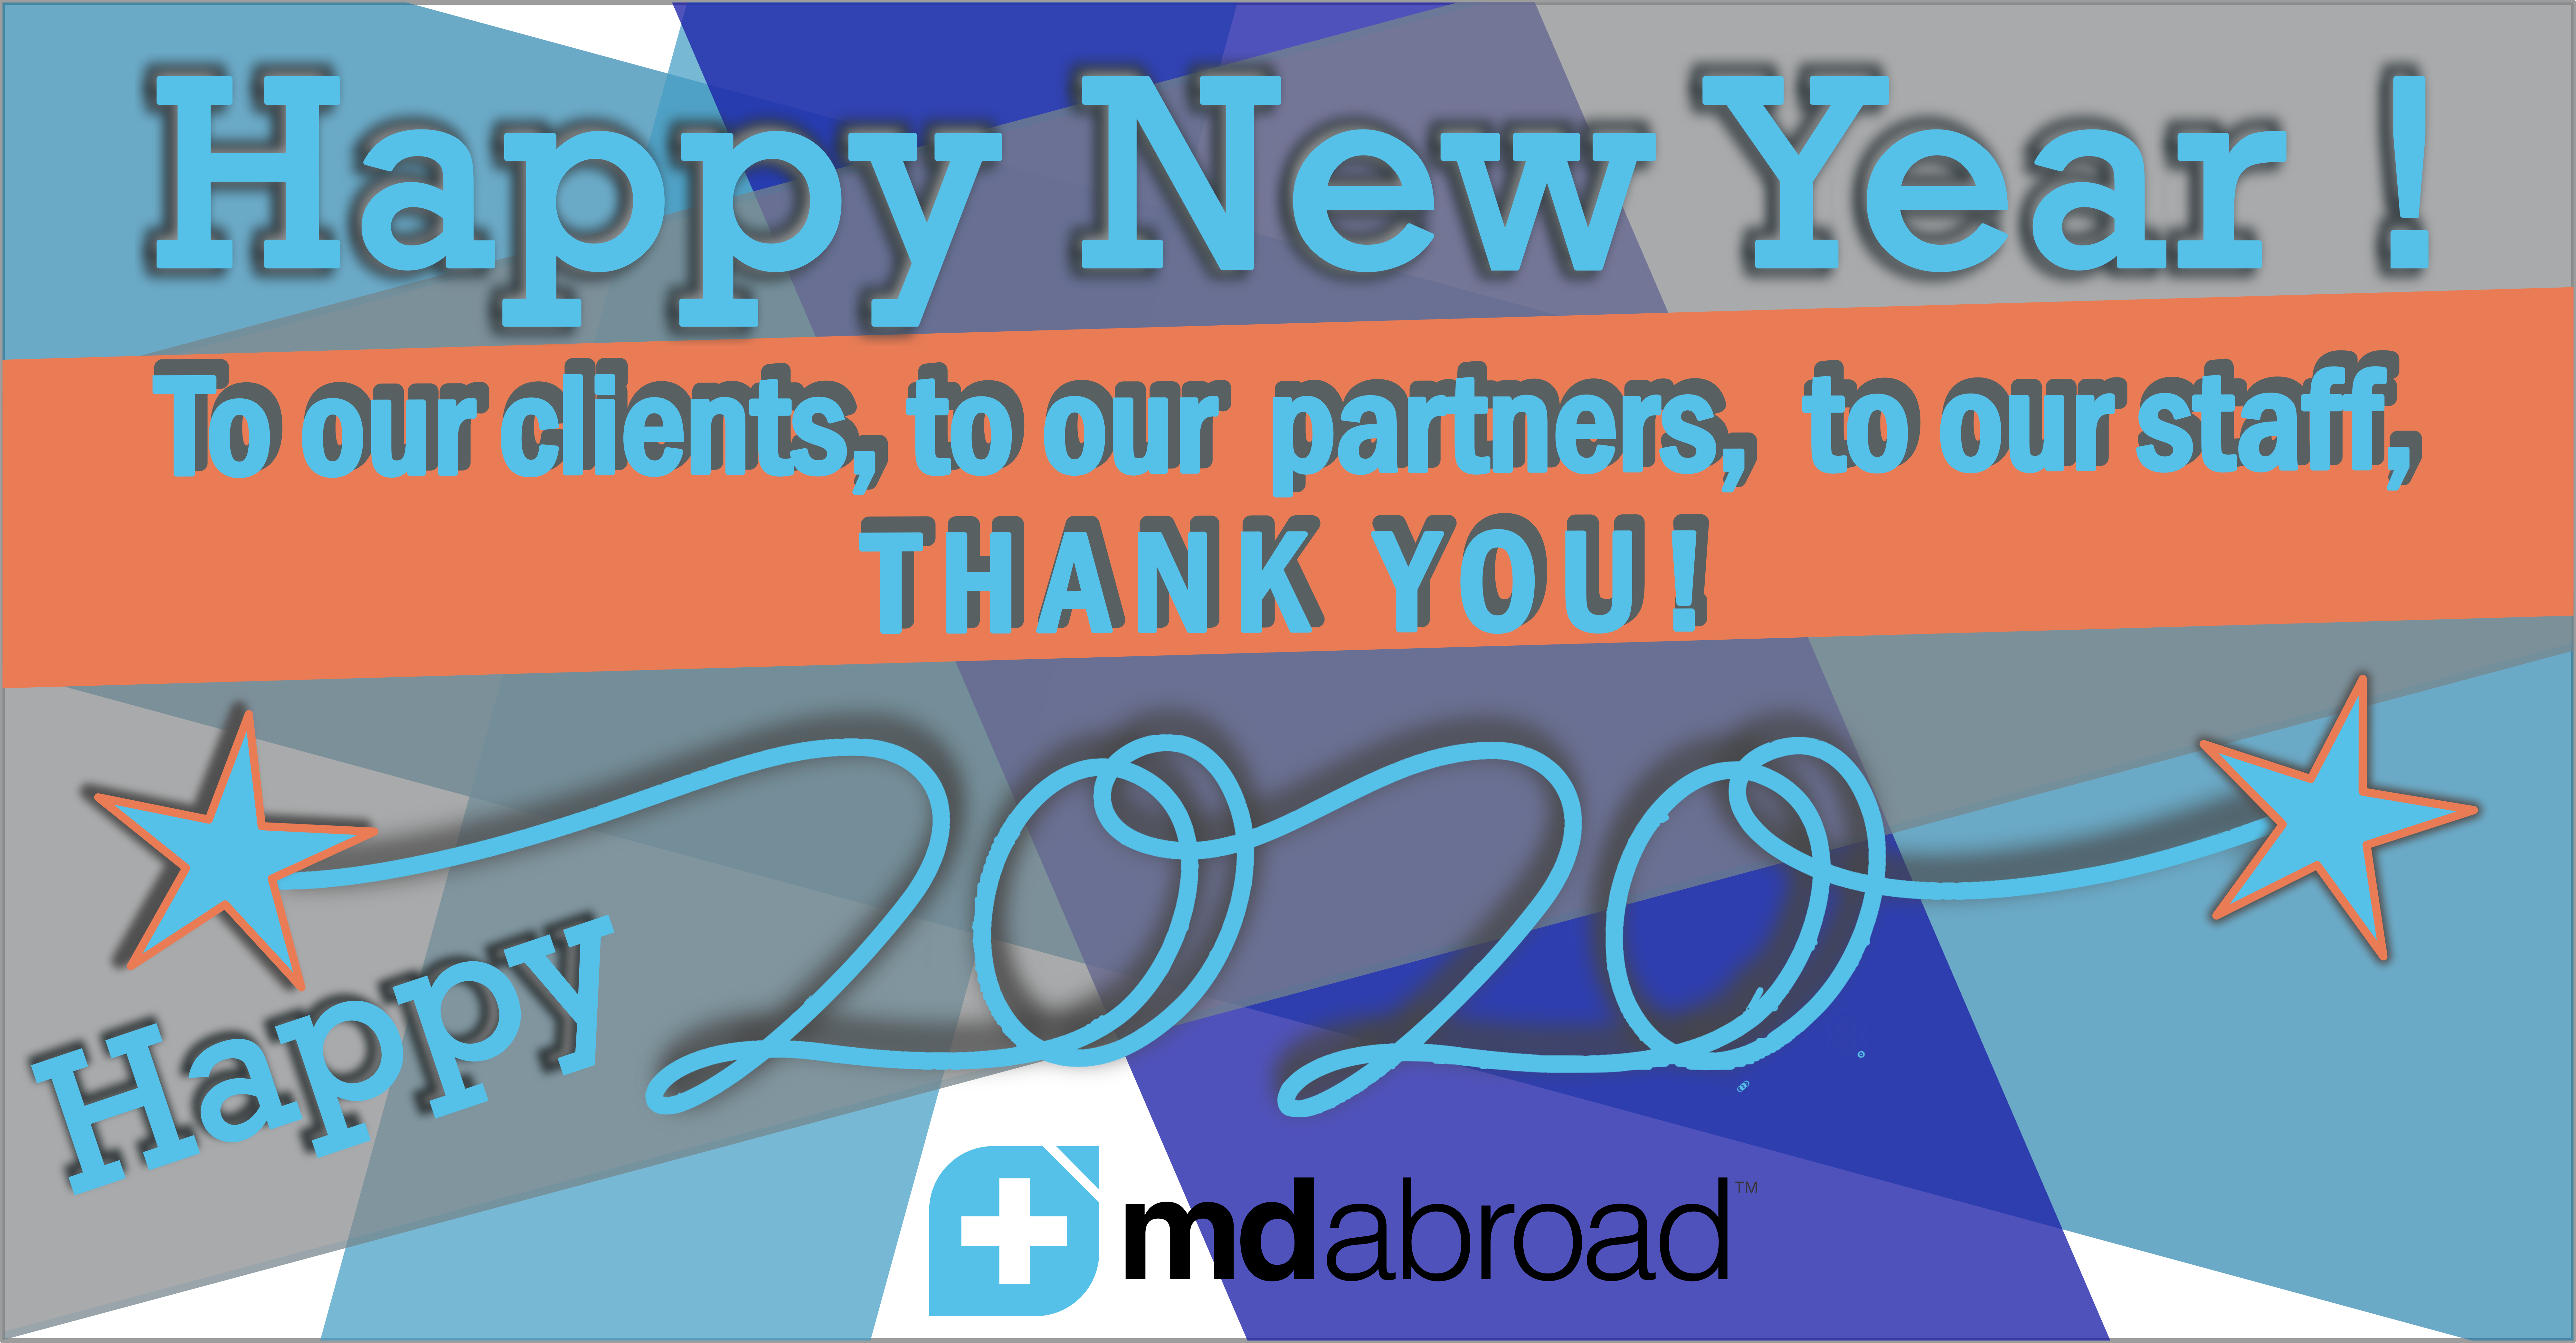 Happy 2020 from MDabroad!